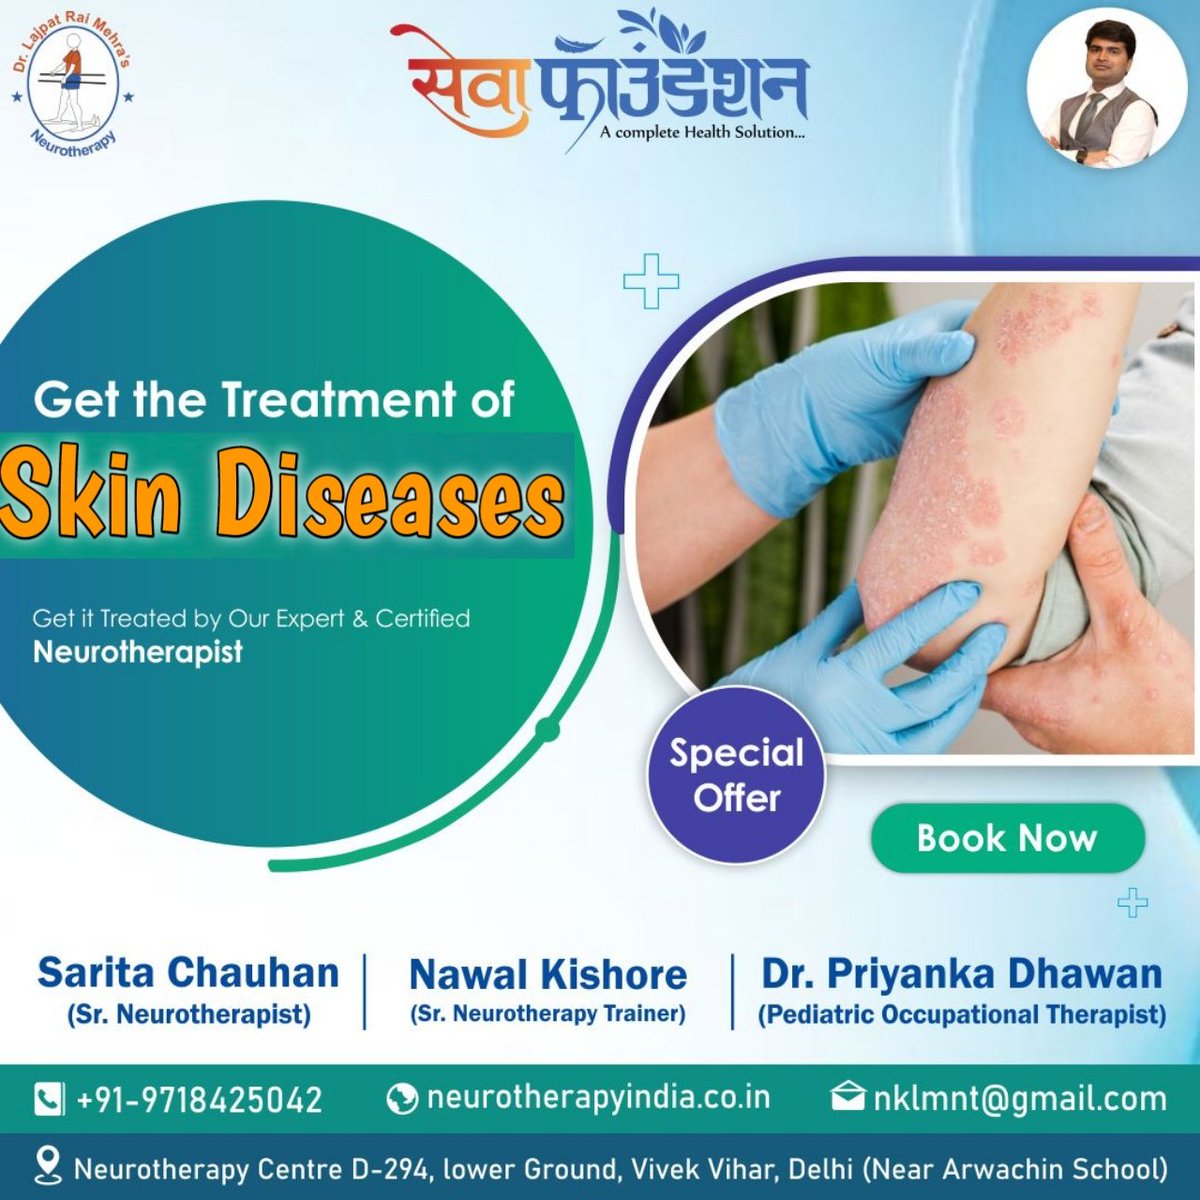 Skin Diseases & Treatment by Neurotherpy 
आज शाम 7 बजे बात करेंगे Skin Disease #skindisease 
#skincare #skinproblem #allergies #Psoriasis 
#eczema #eczemaproblems #eczematreatment 

For Neurotherapy Type on Google :  #Nawalsir 
For Neurotherapy Treatment & Training Services